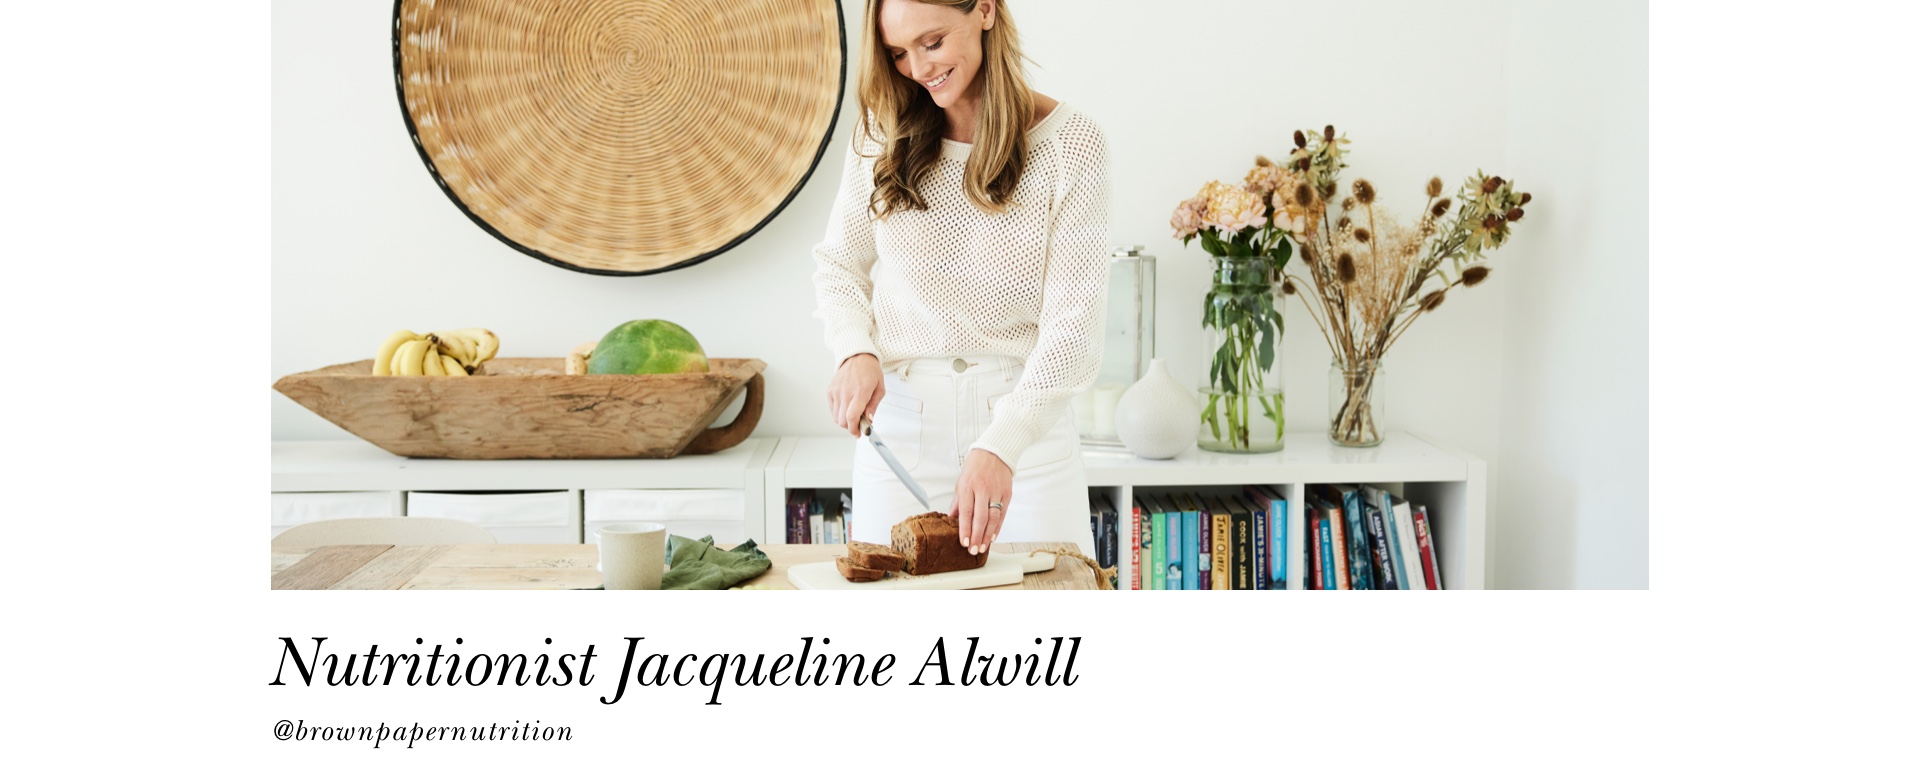 Nutritionist Jacqueline Alwill from @brownpapernutrition